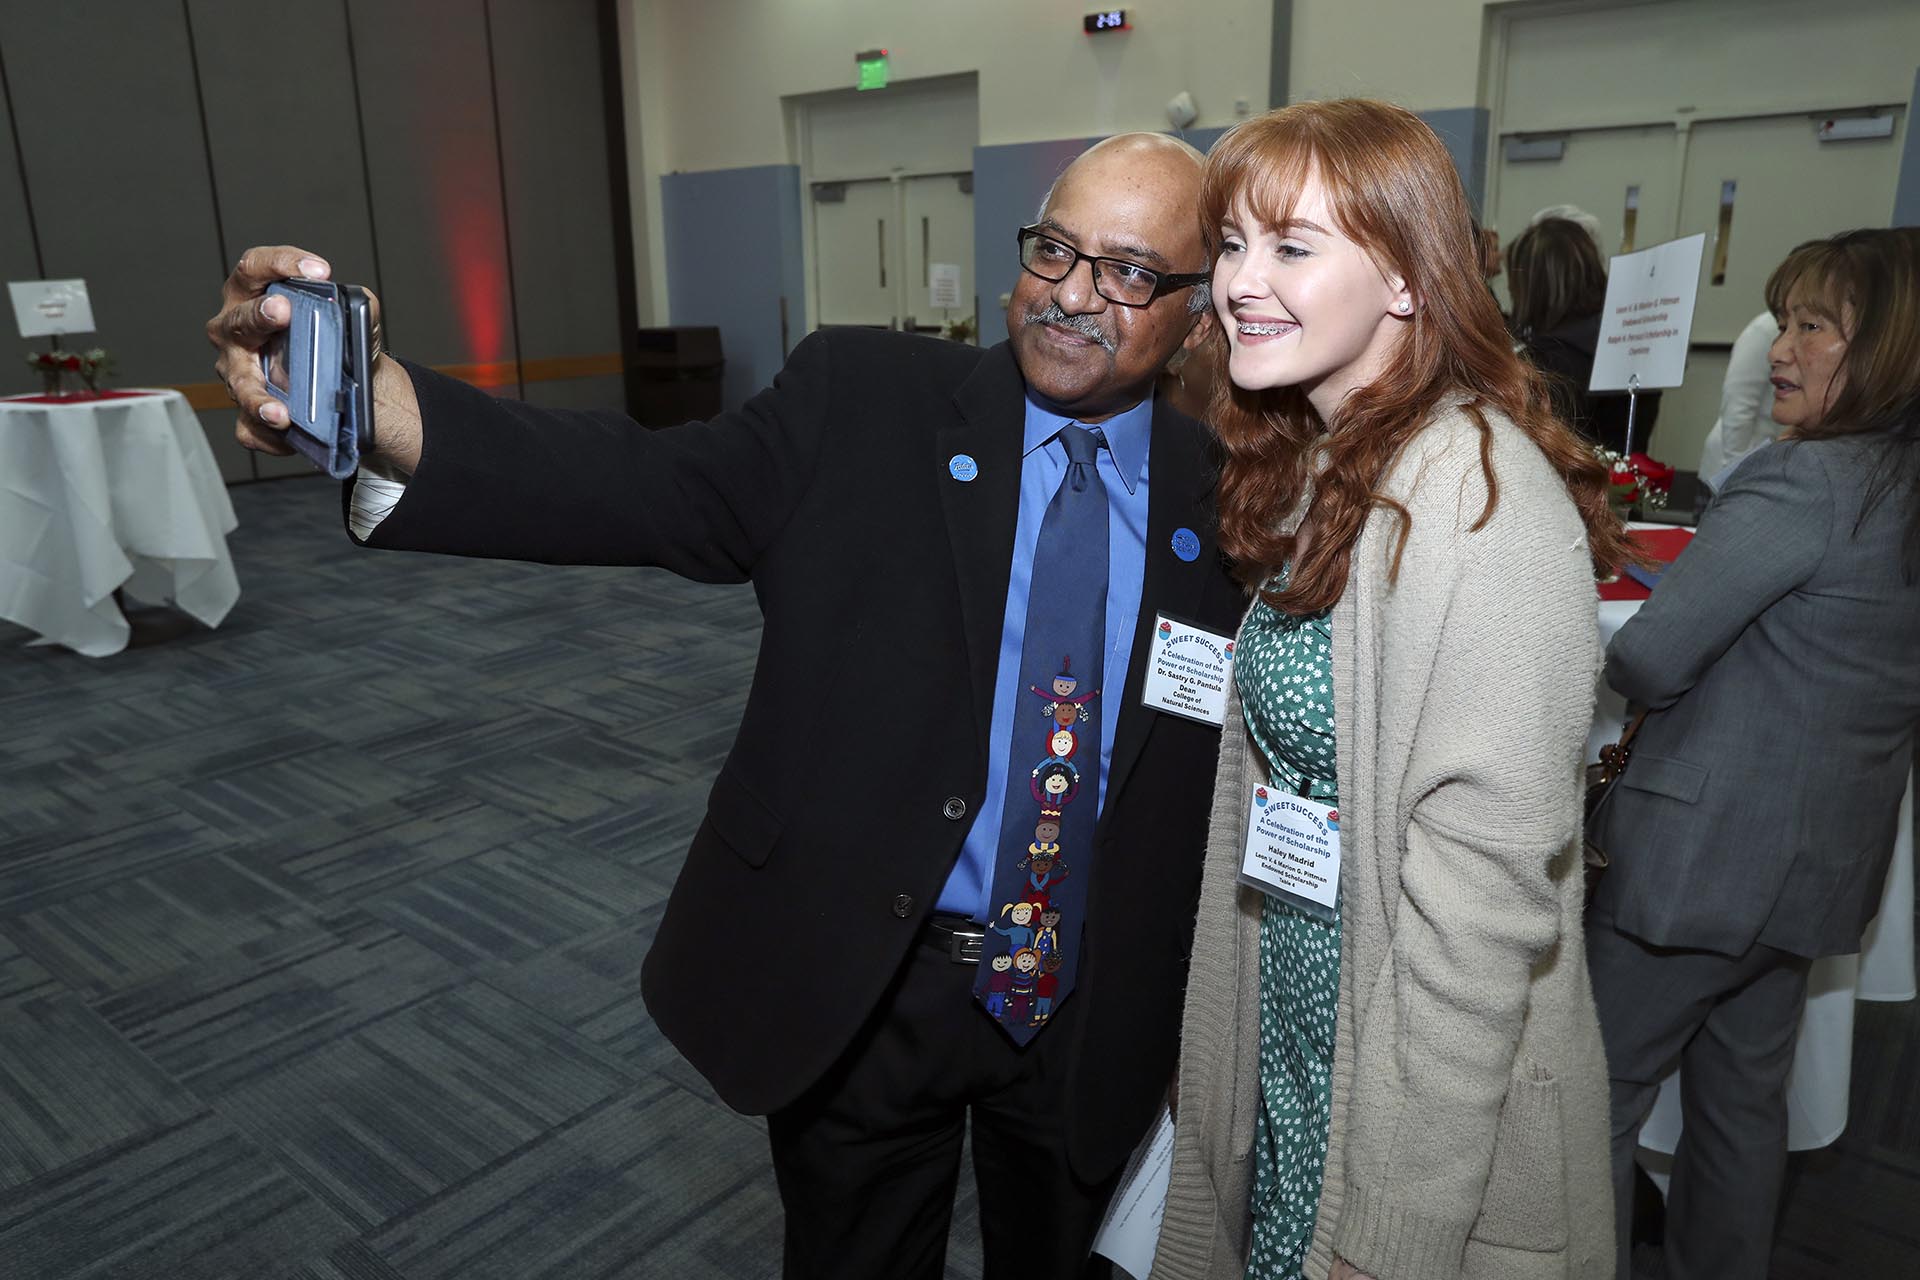 College of Natural Sciences Dean Sastry Pantula takes a selfie with student Haley Madrid at the 2020 “Sweet Success” scholarship reception. The 2022 event will take place on April 21.